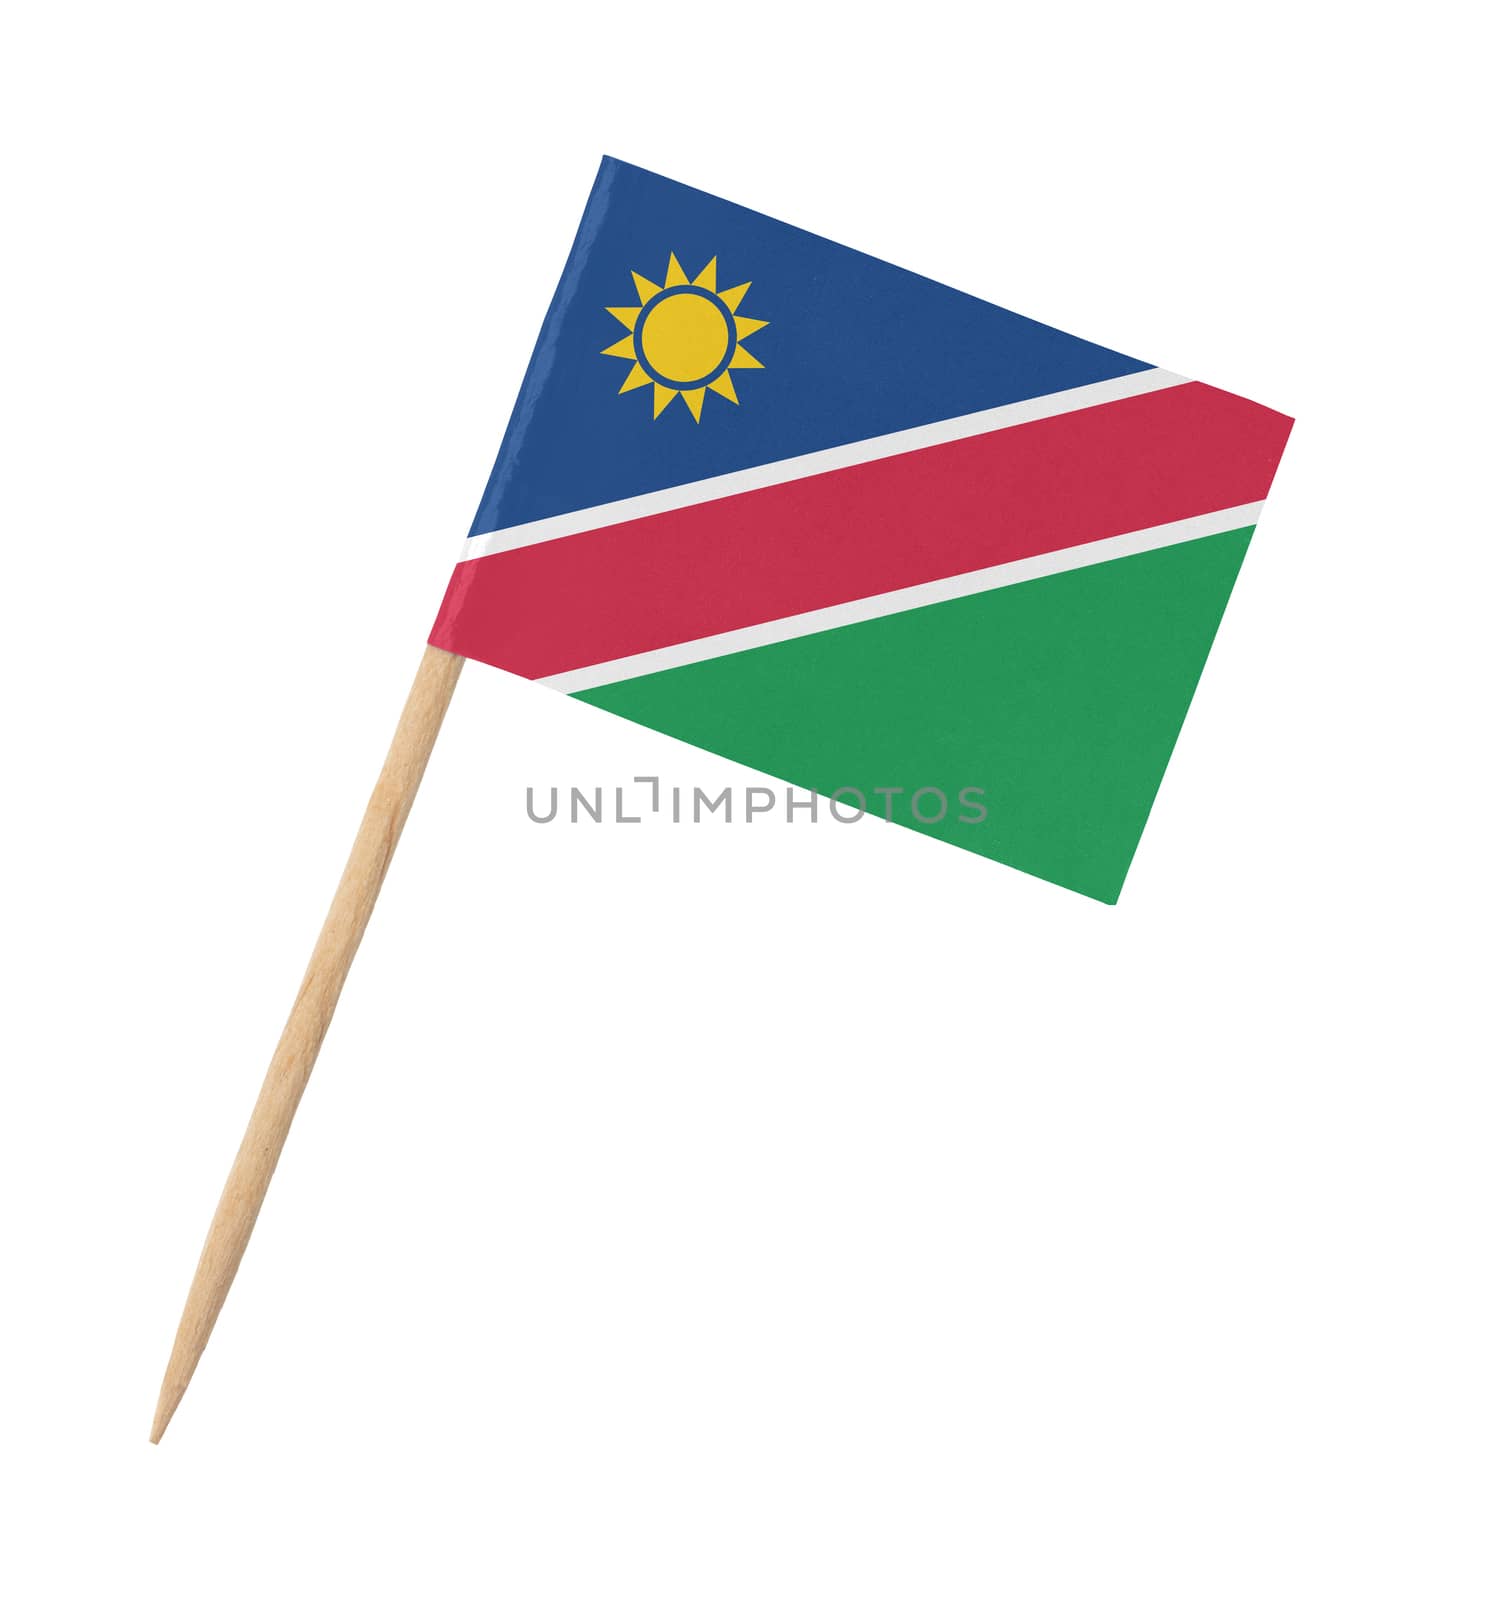 Small paper flag of Namibia on wooden stick, isolated on white